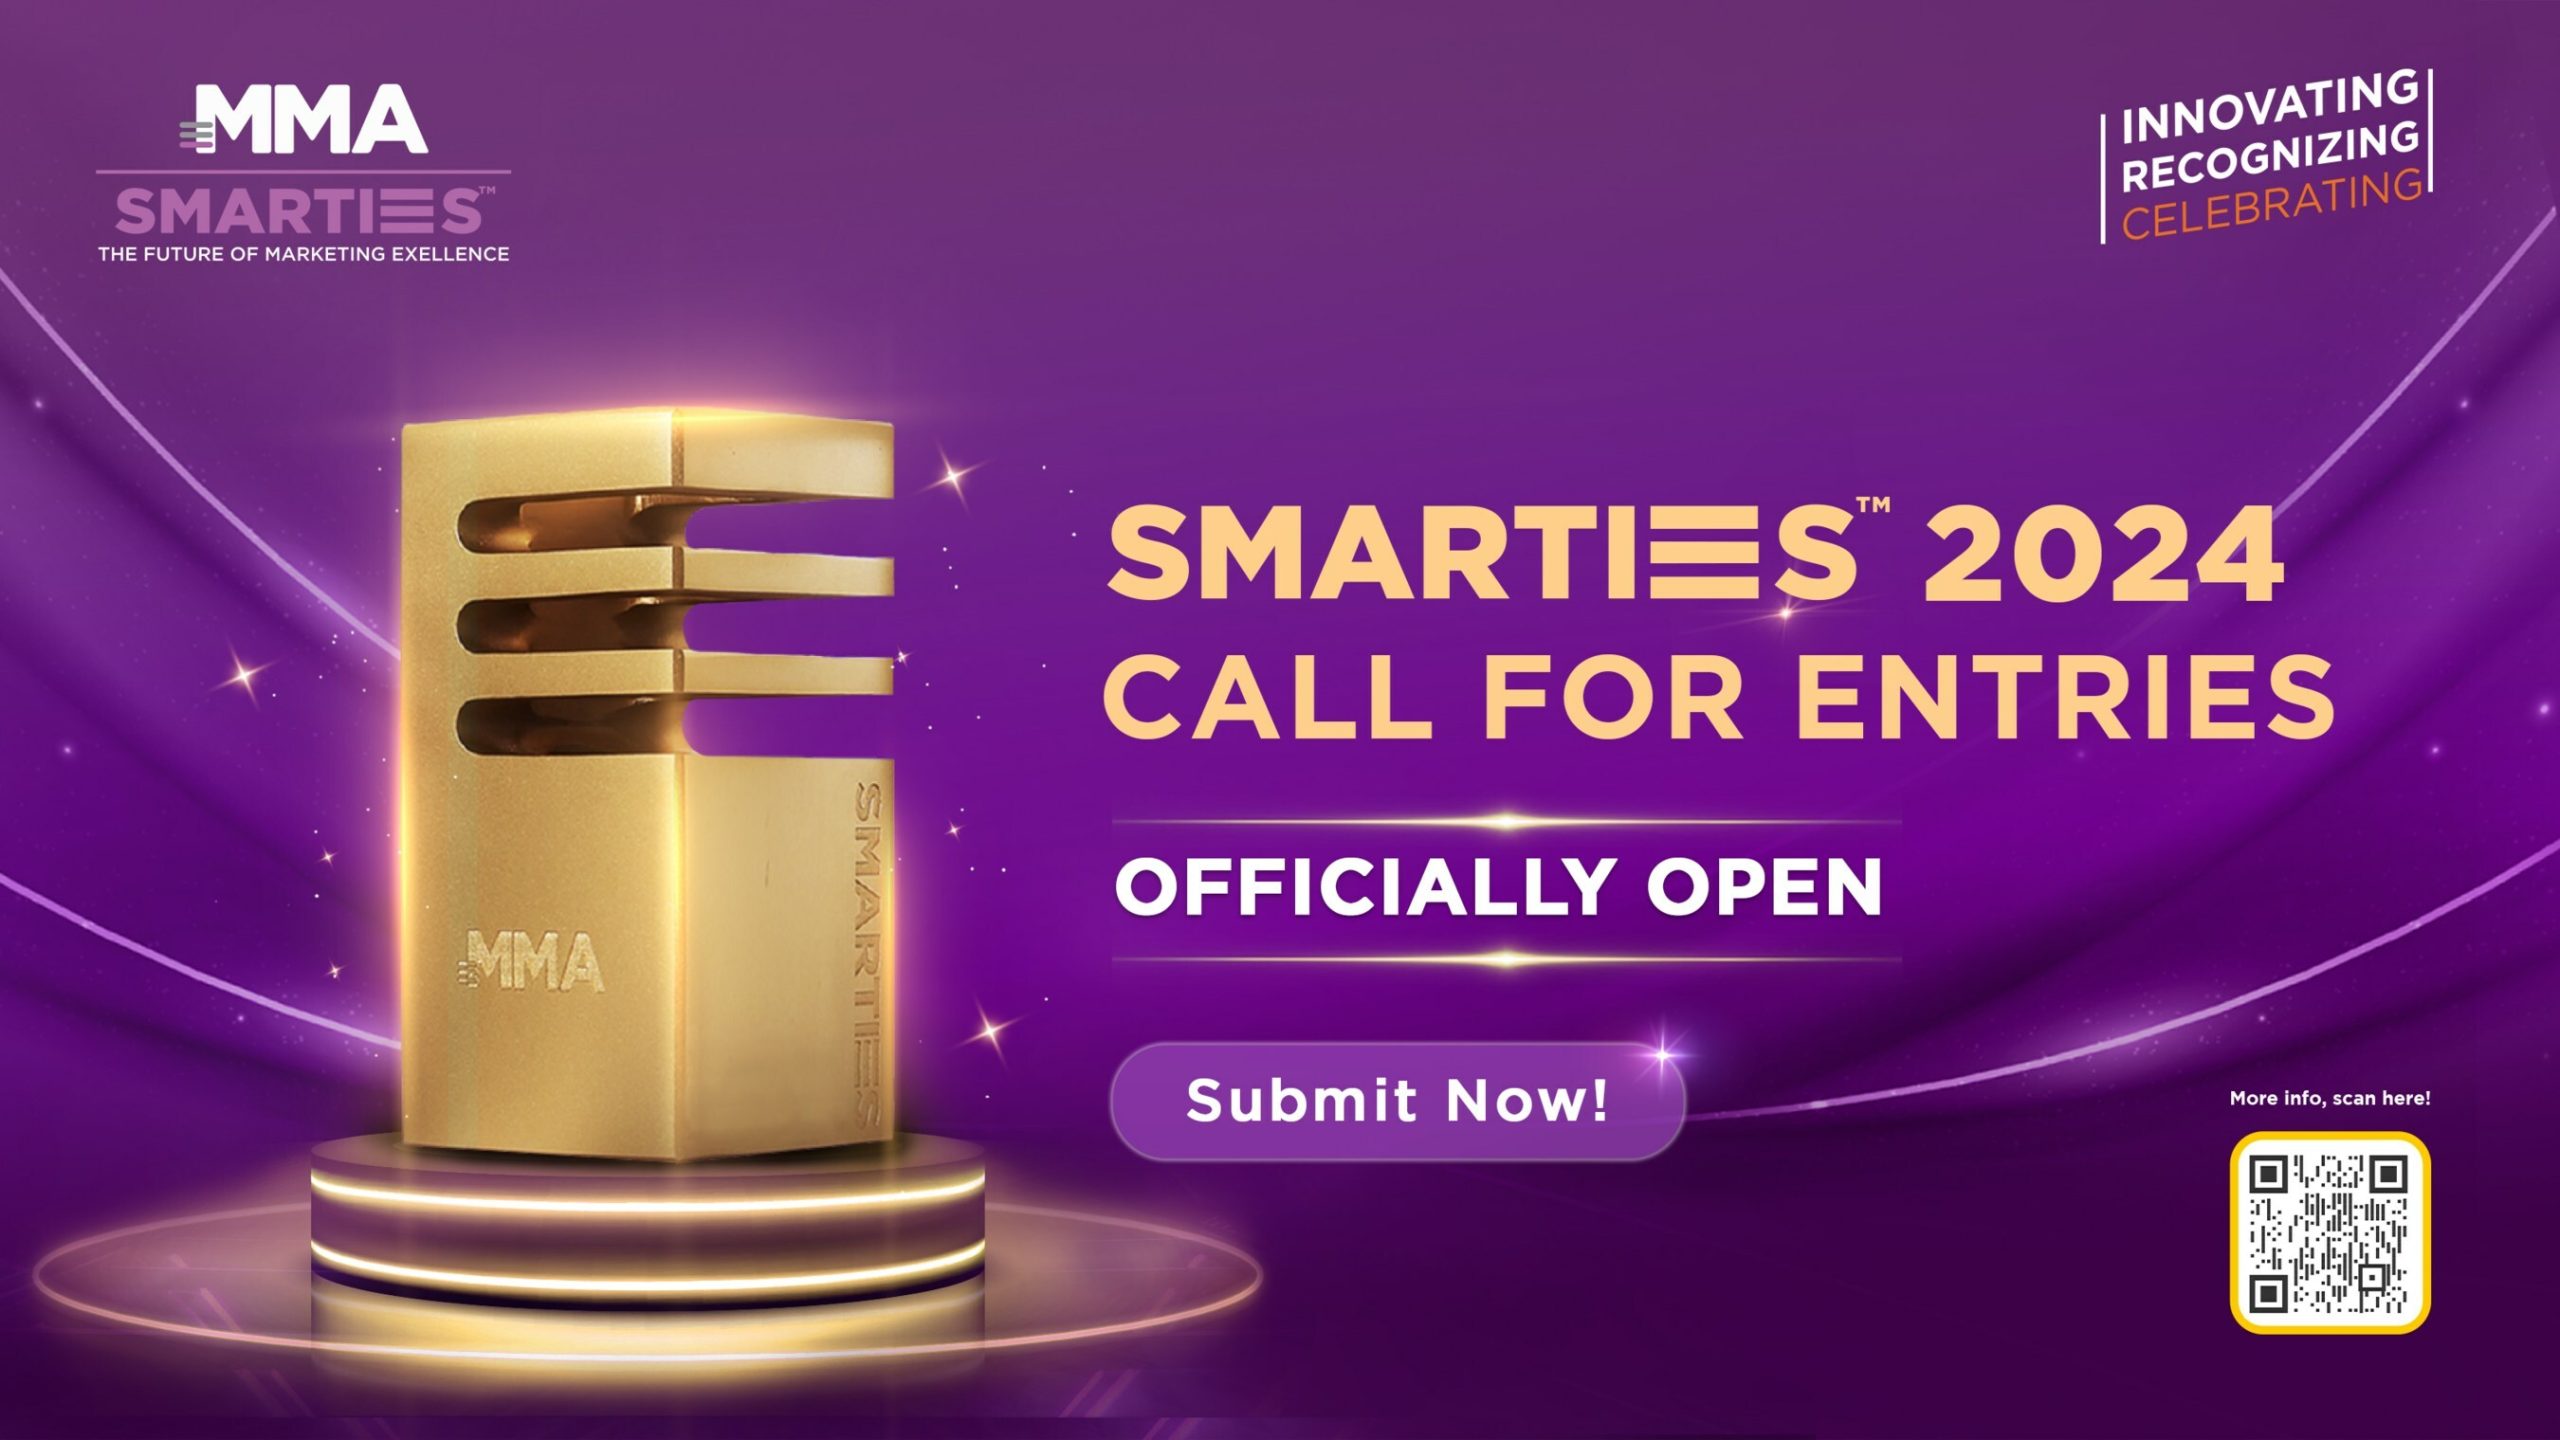 SMARTIES 2024 is now open for submissions